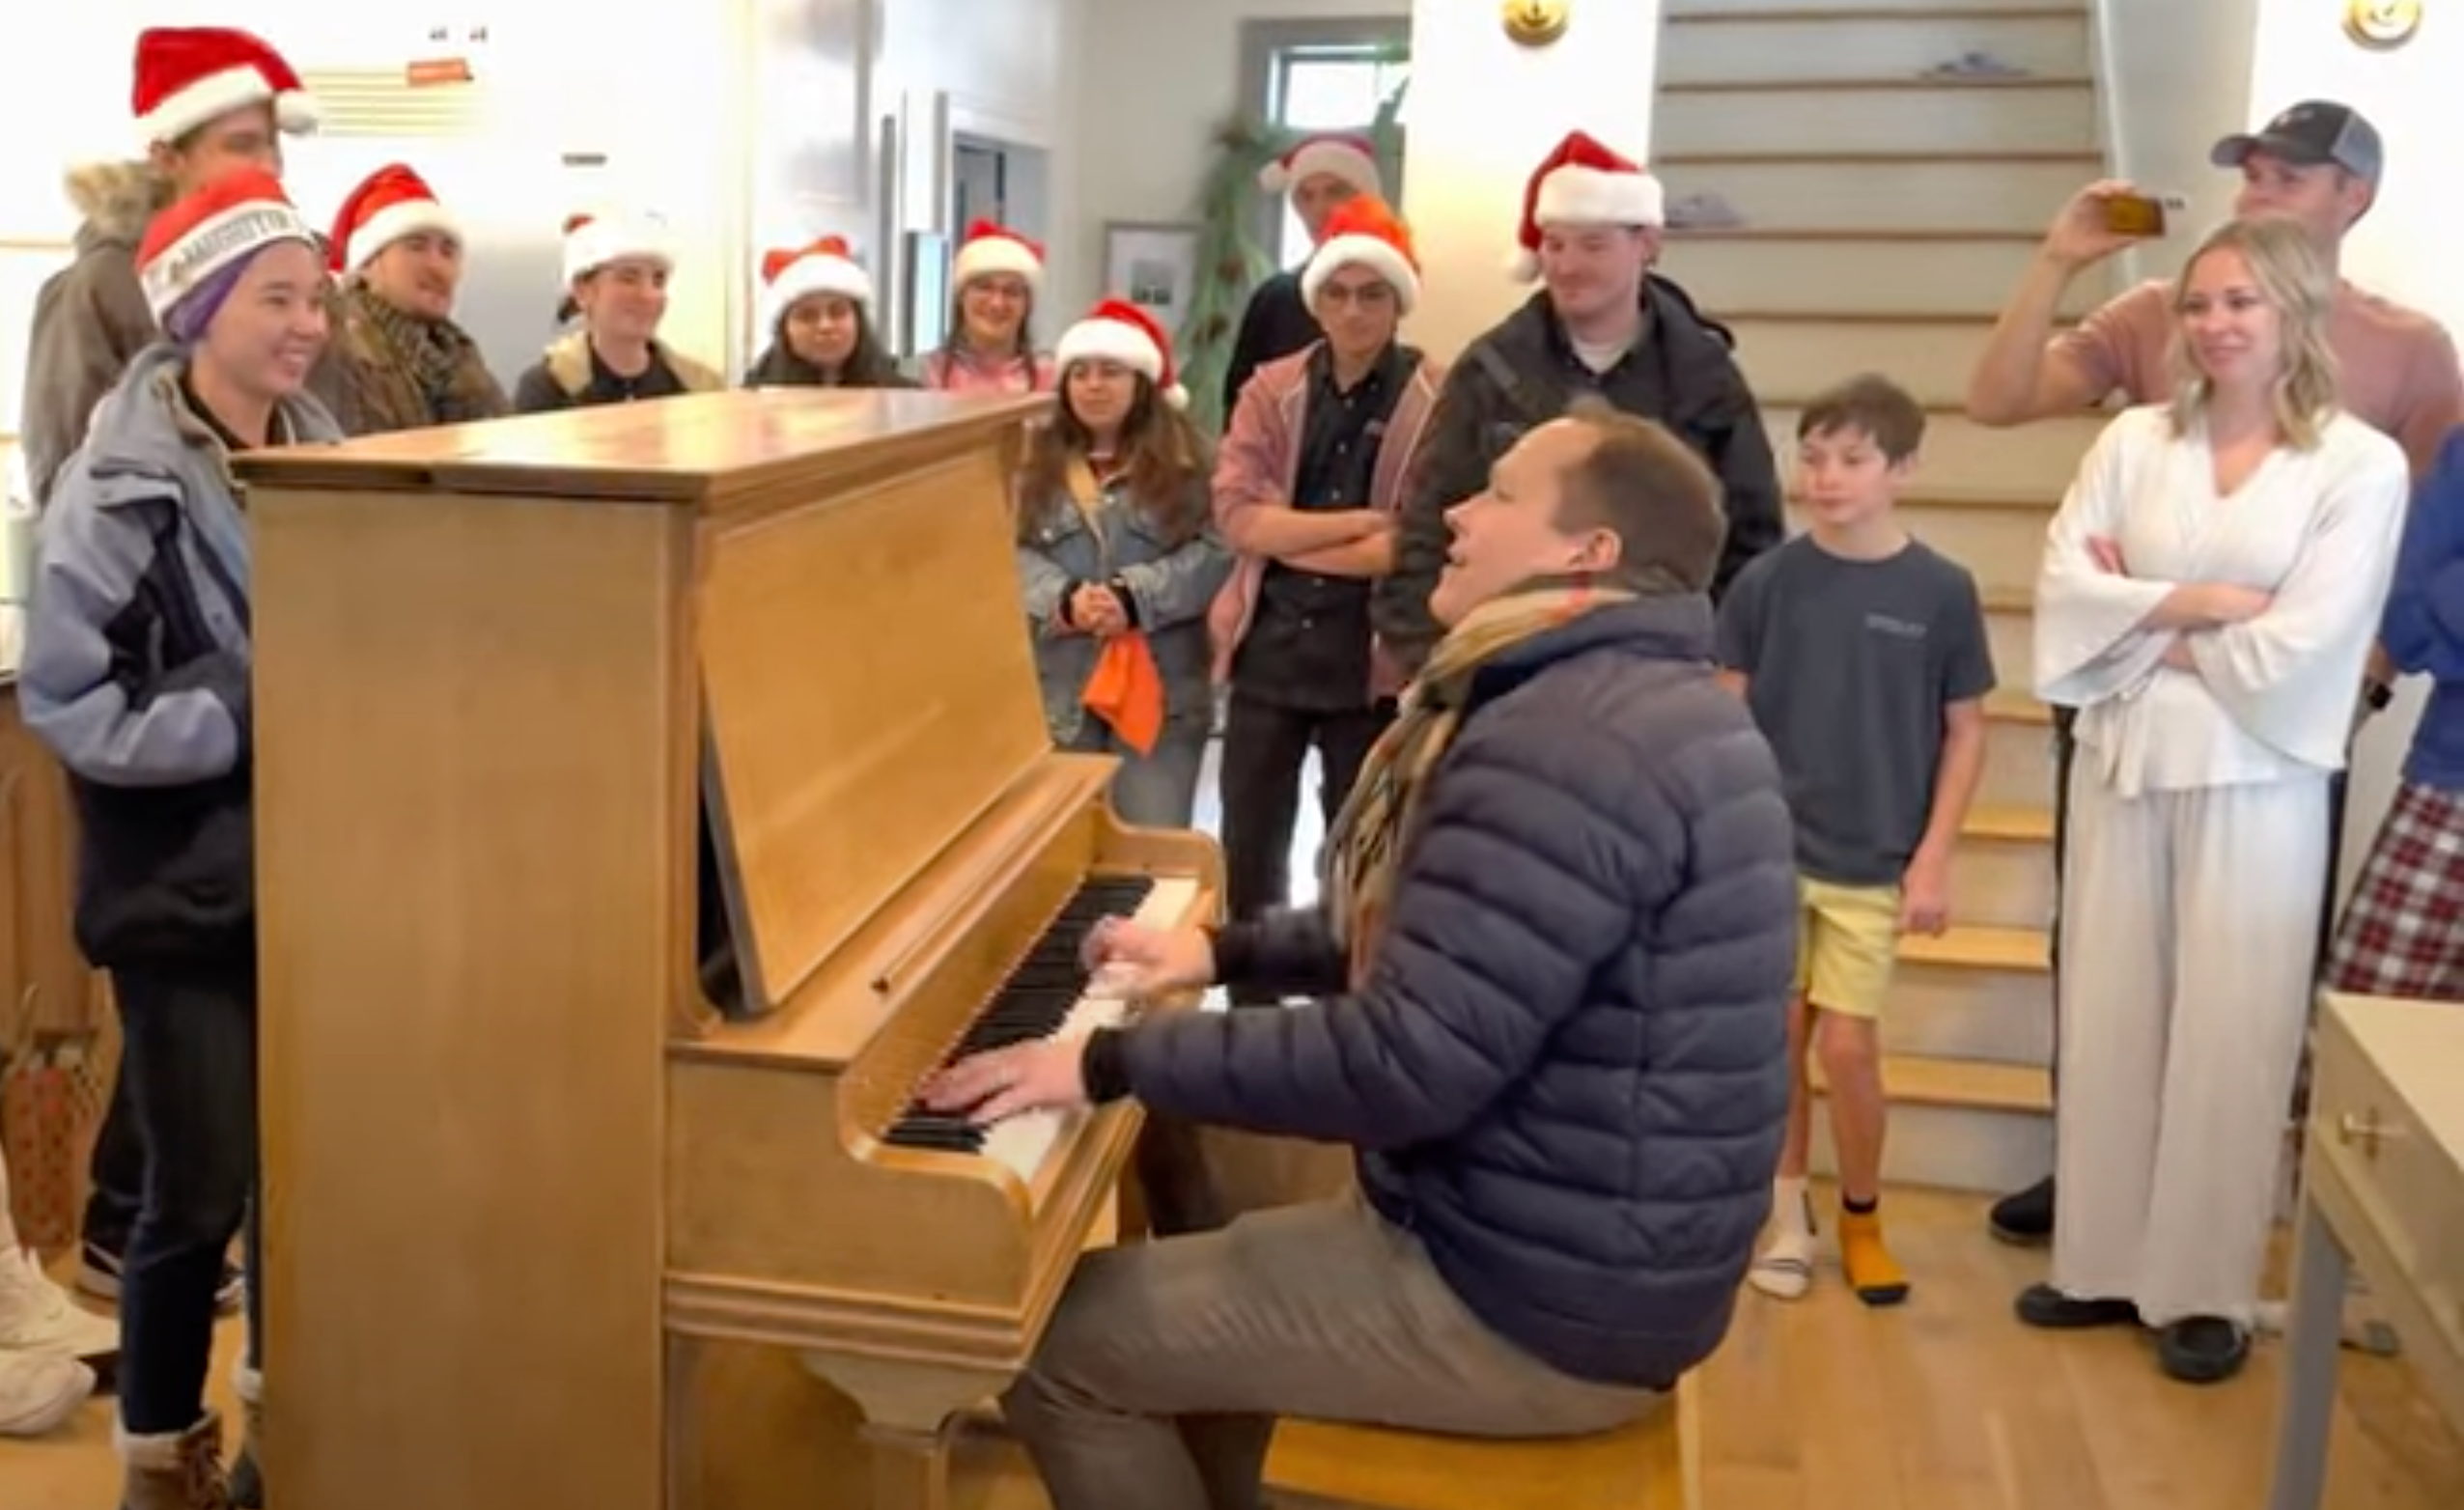 Load video: Feliz Navid - We want to wish you a Merry Christmas - Jazzy style by Brigham Larson on the newly restored Christmas piano!